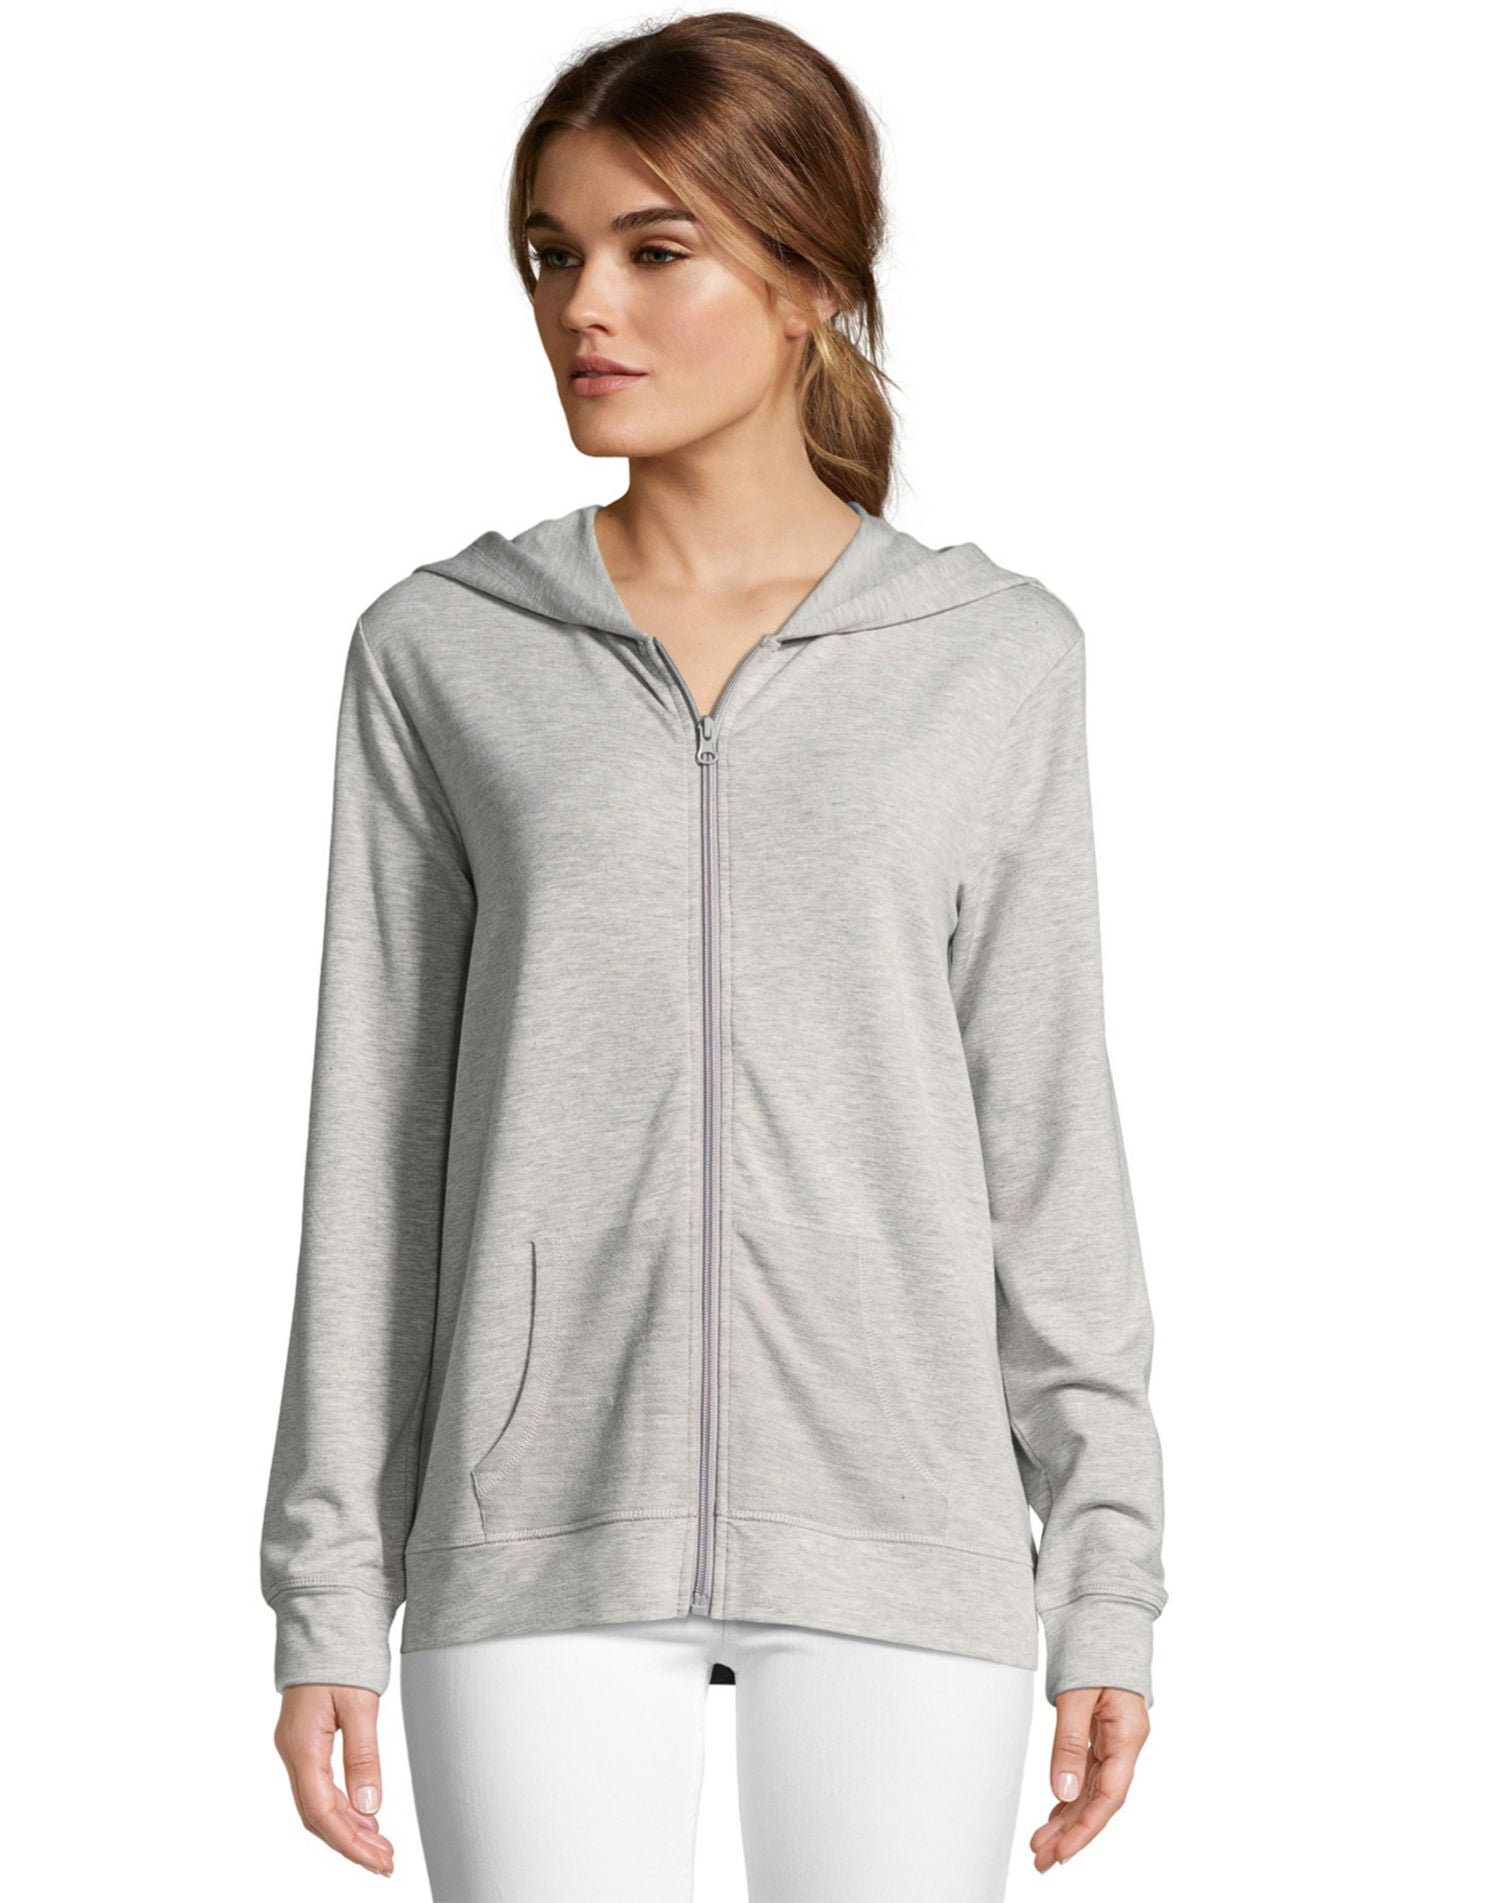 Hanes - Hanes Womens Heathered French Terry Zip Hoodie, L, Light ...